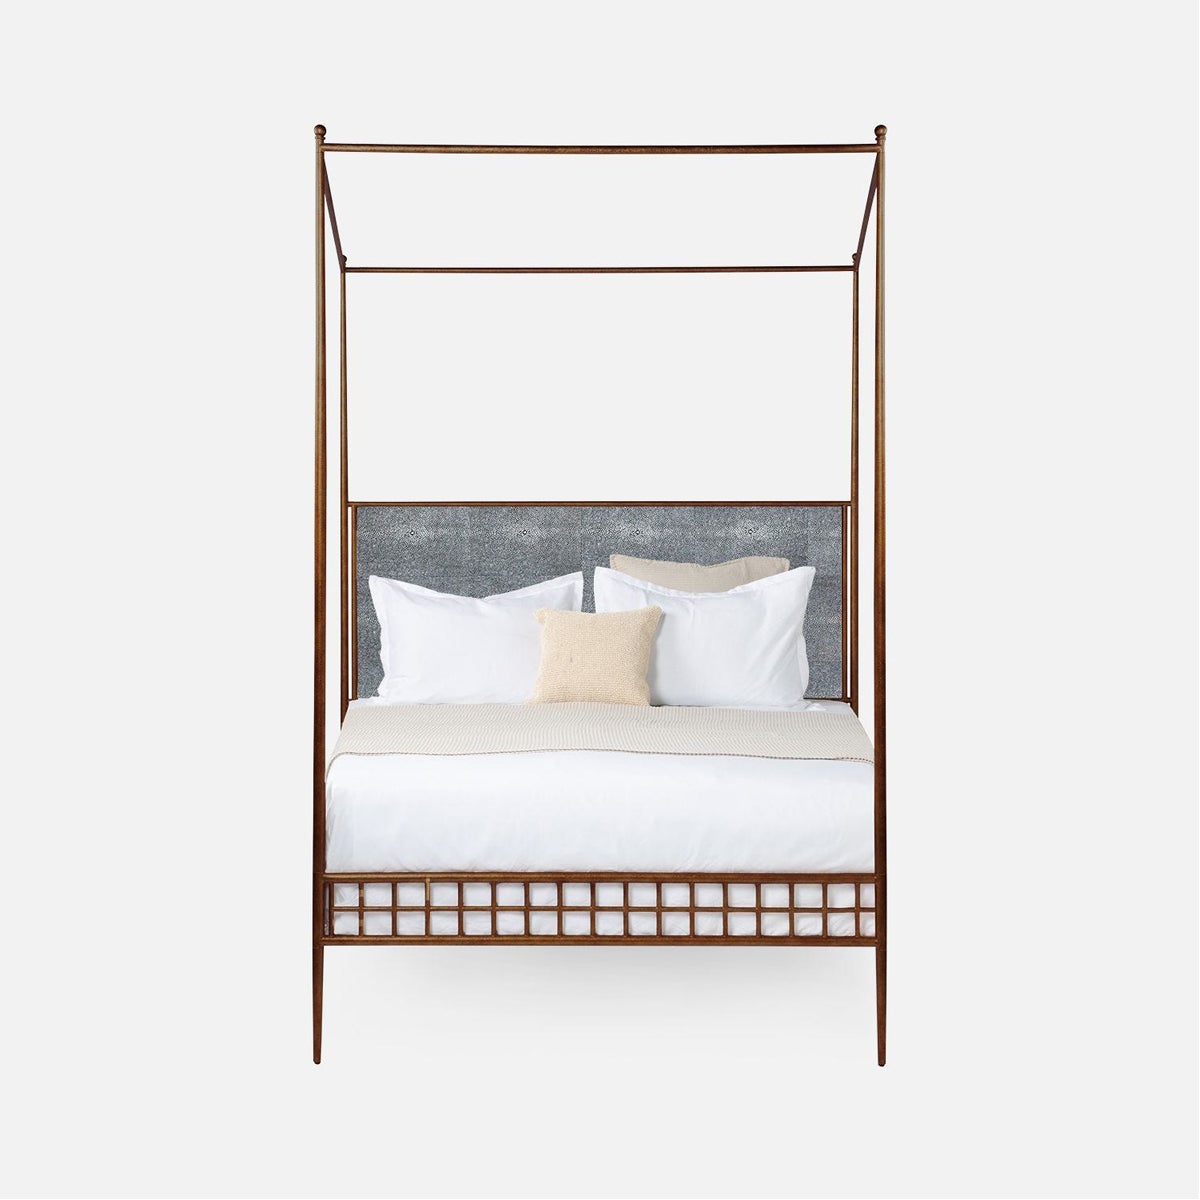 Made Goods Hamilton Textured Iron Canopy Bed in Rhone Leather